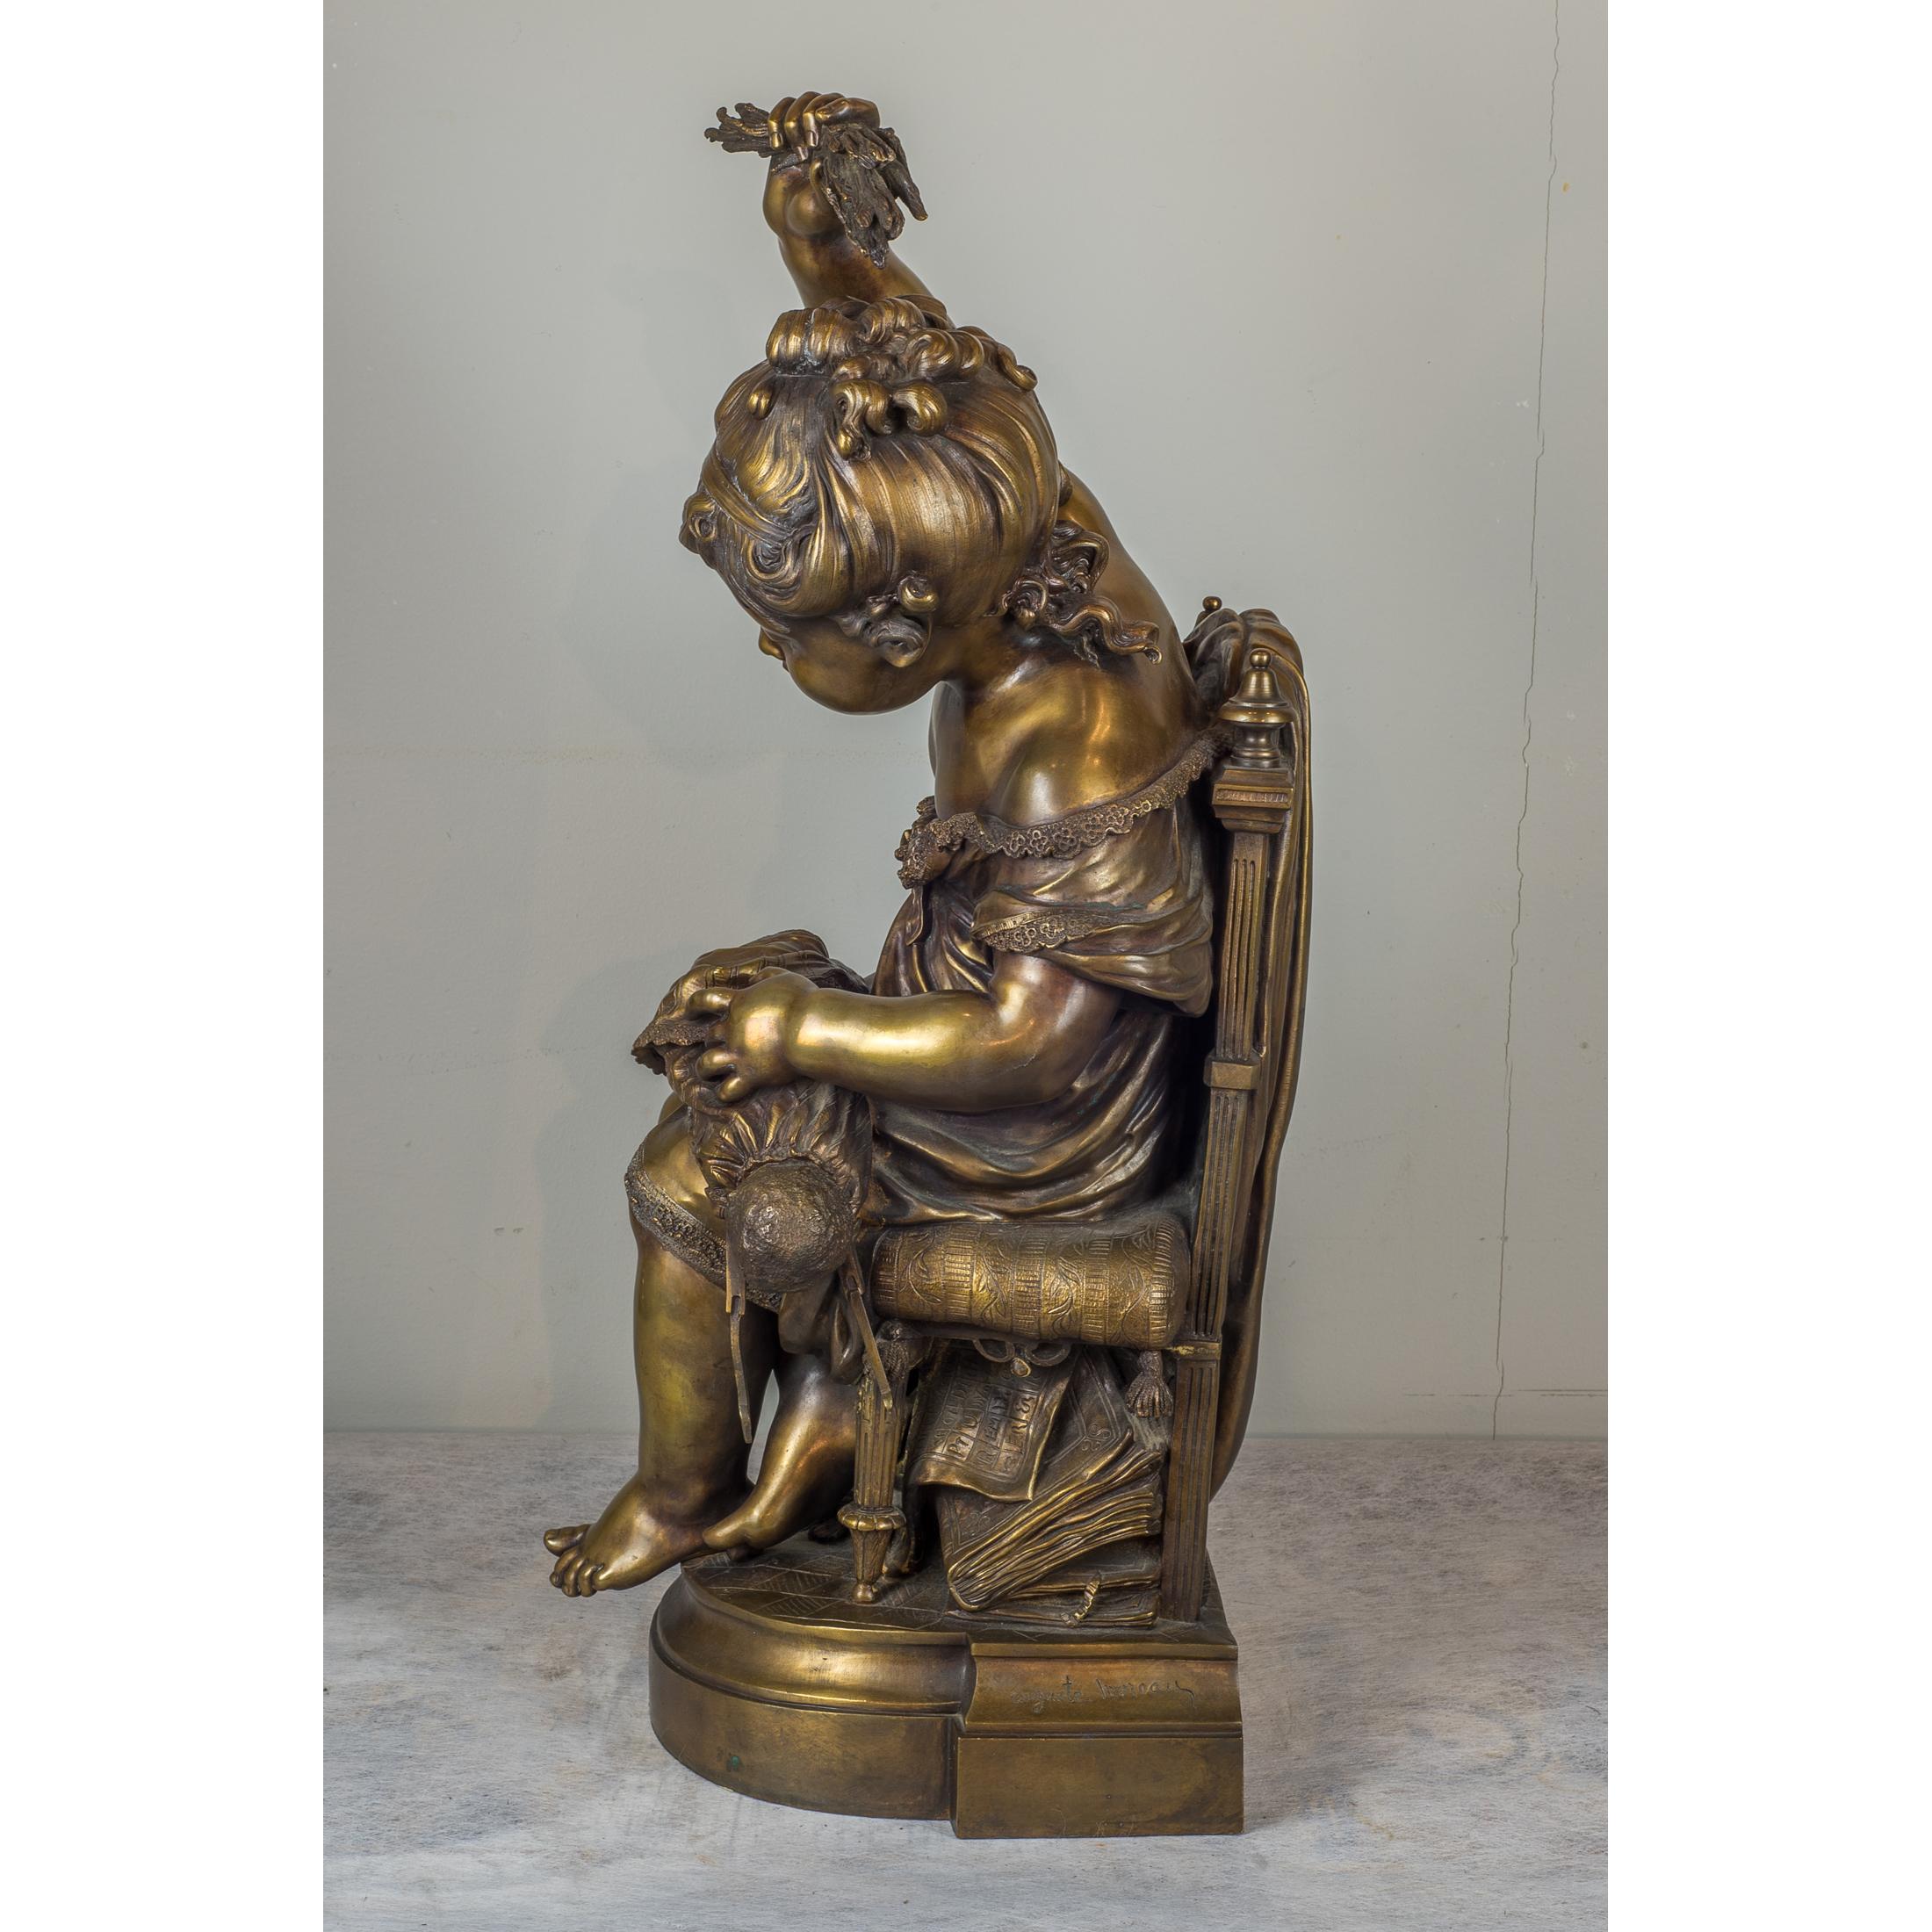 French Patinated Bronze Sculpture of a Girl with Doll by Auguste Moreau - Gold Figurative Sculpture by Louis Auguste Moreau